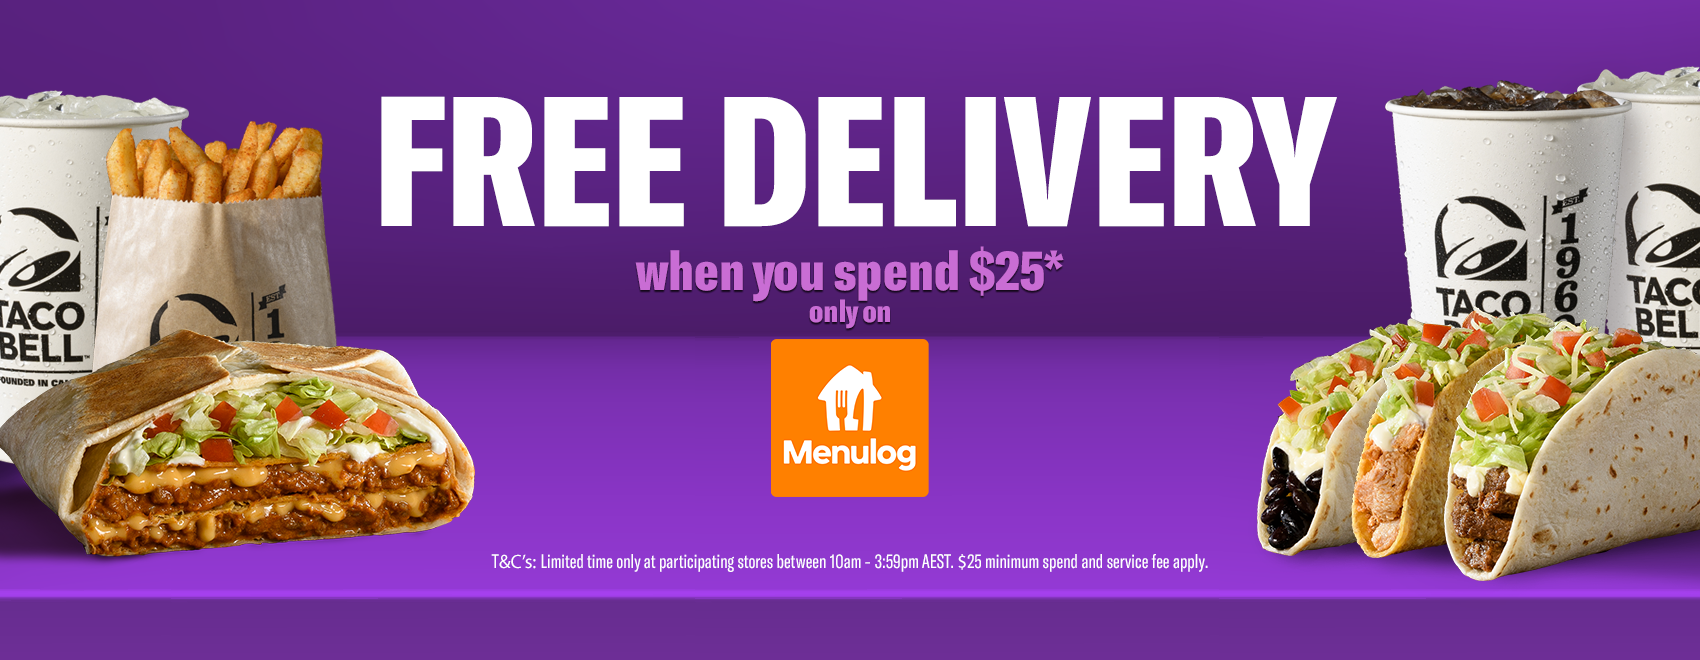 Free delivery on Taco Bell orders via Menulog[min. spend $25]